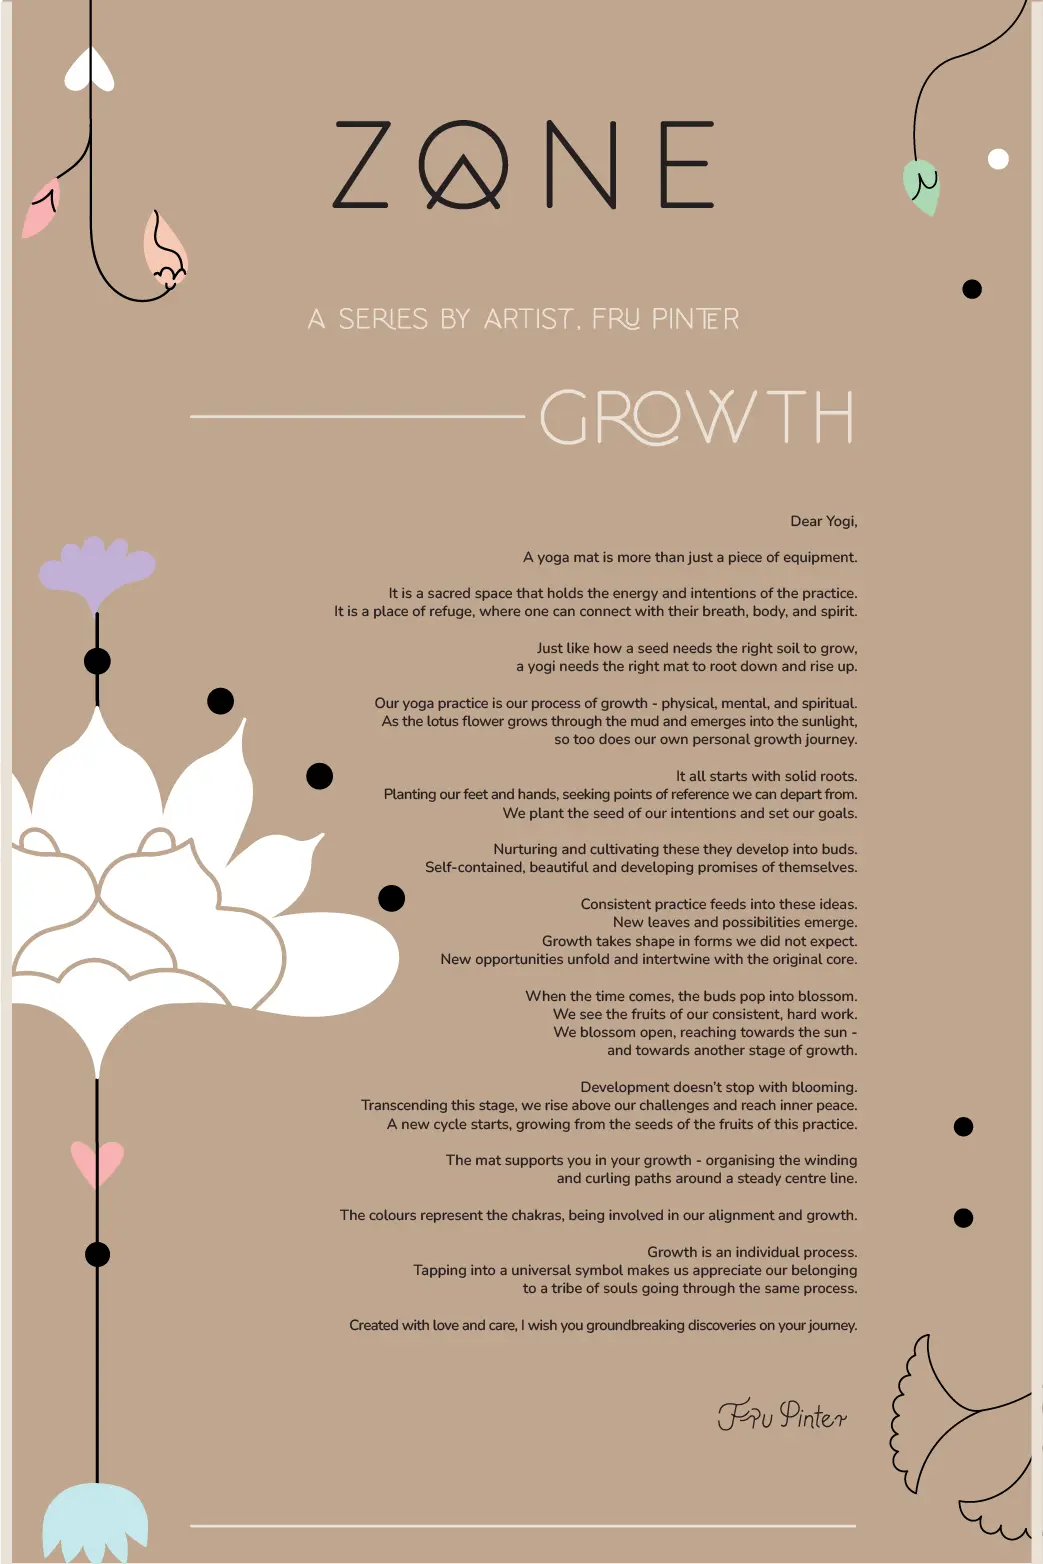 Growth Yoga Mat Meaning